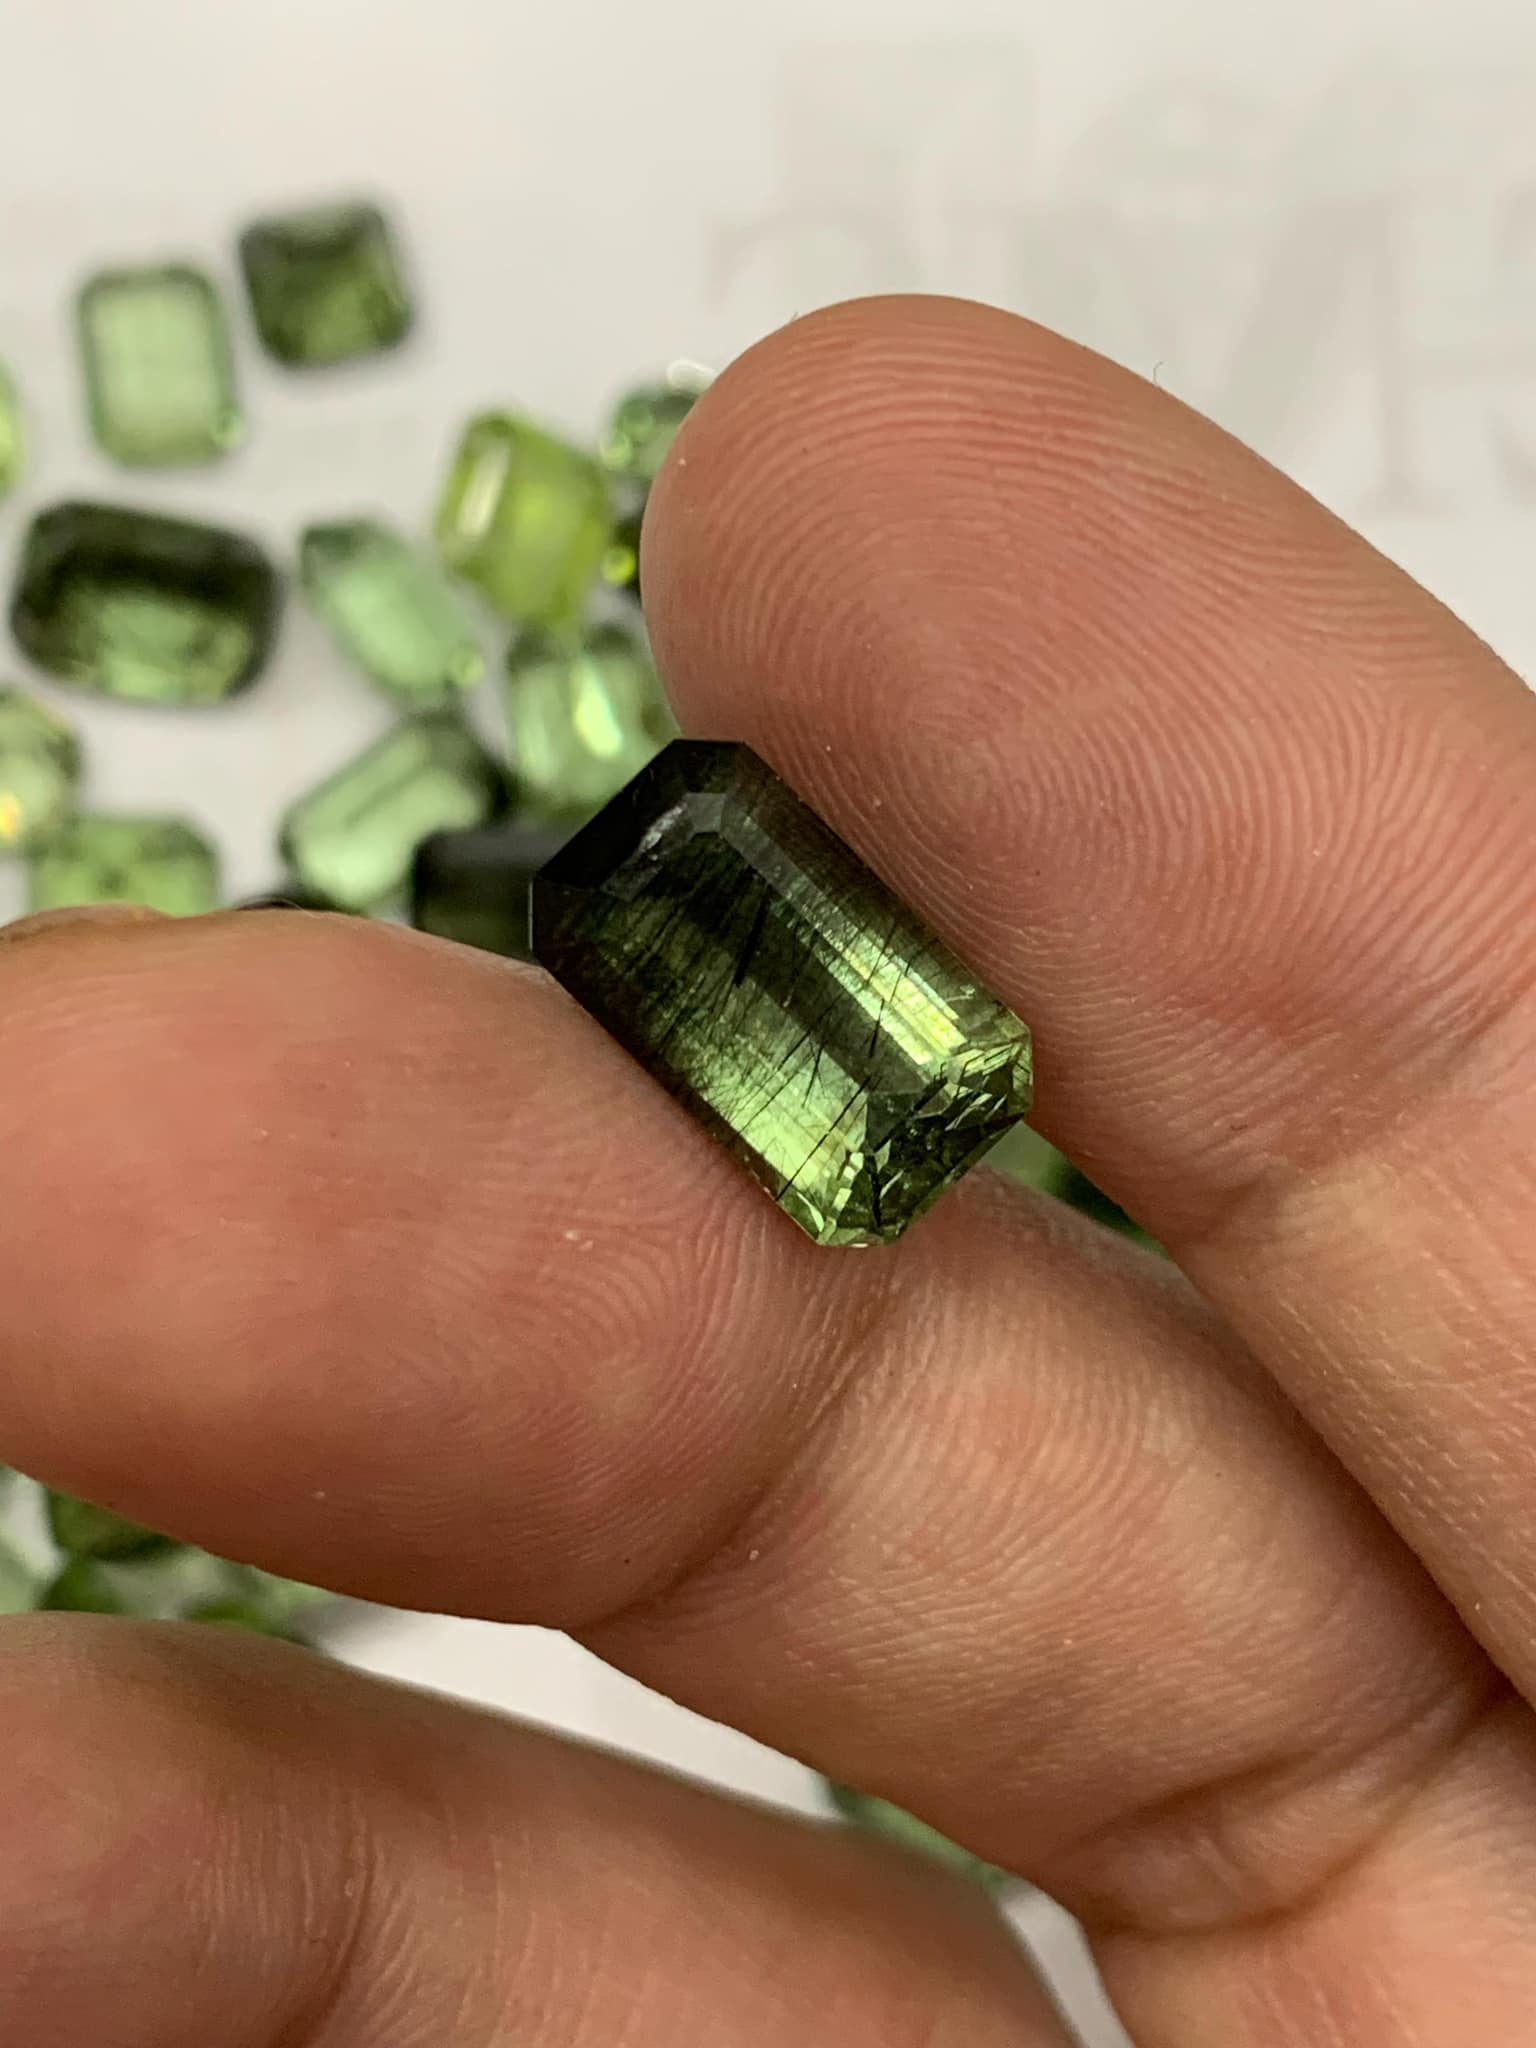 Grab rutile included peridots for jewelry designs